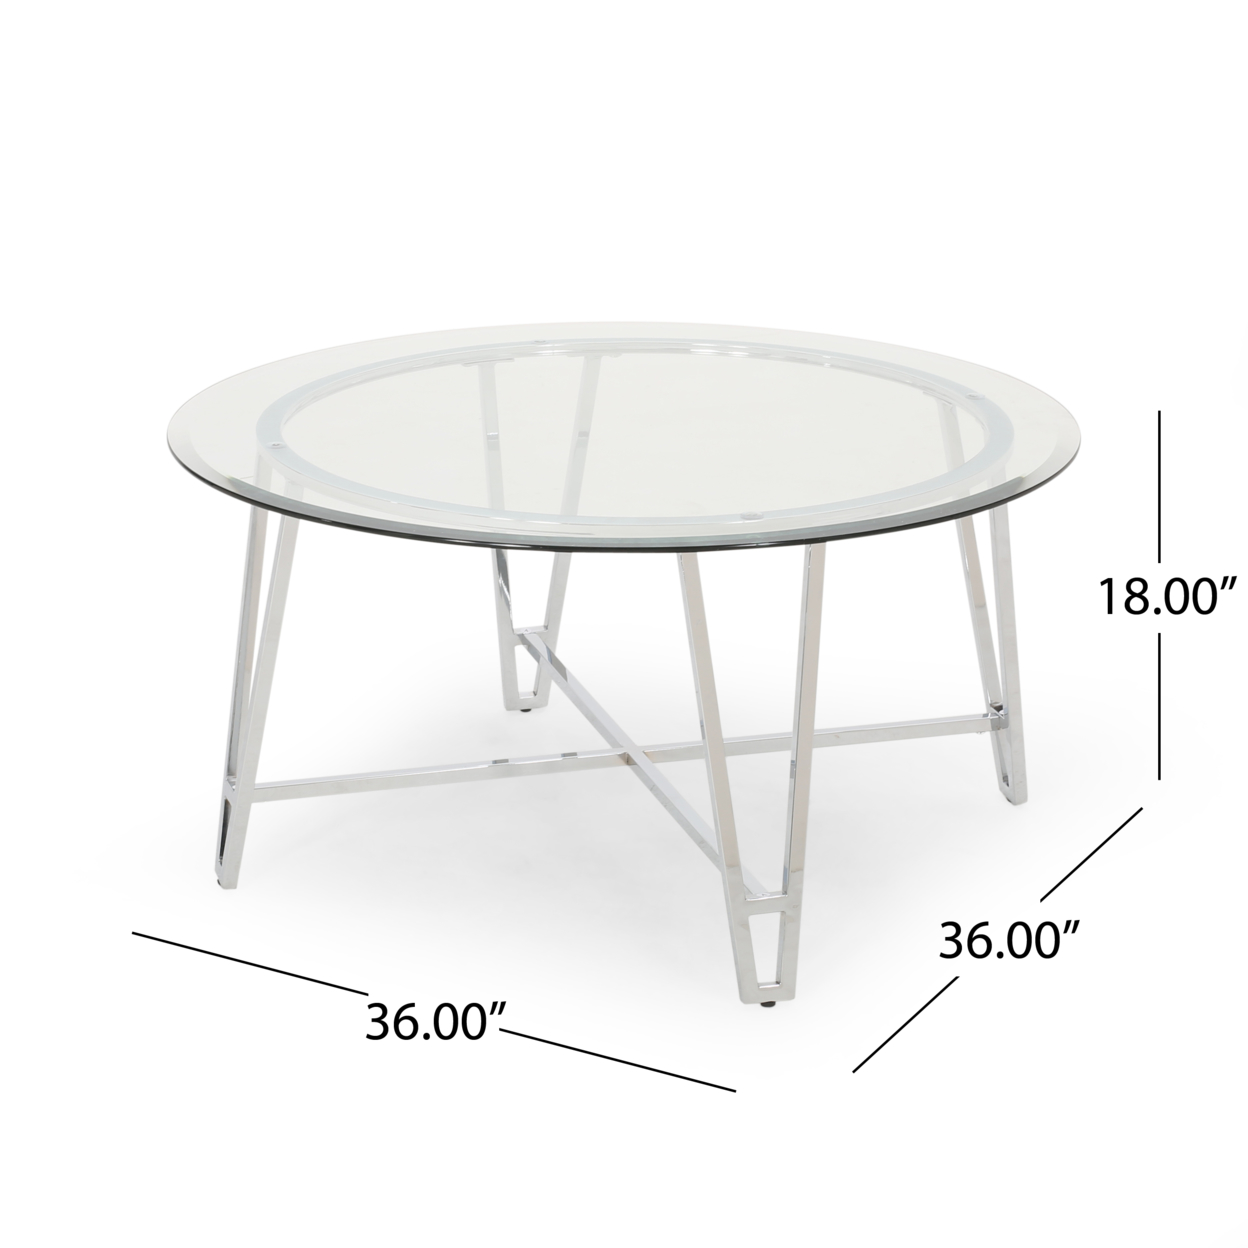 Phoebe Modern Iron Coffee Table With Round Tempered Glass Top